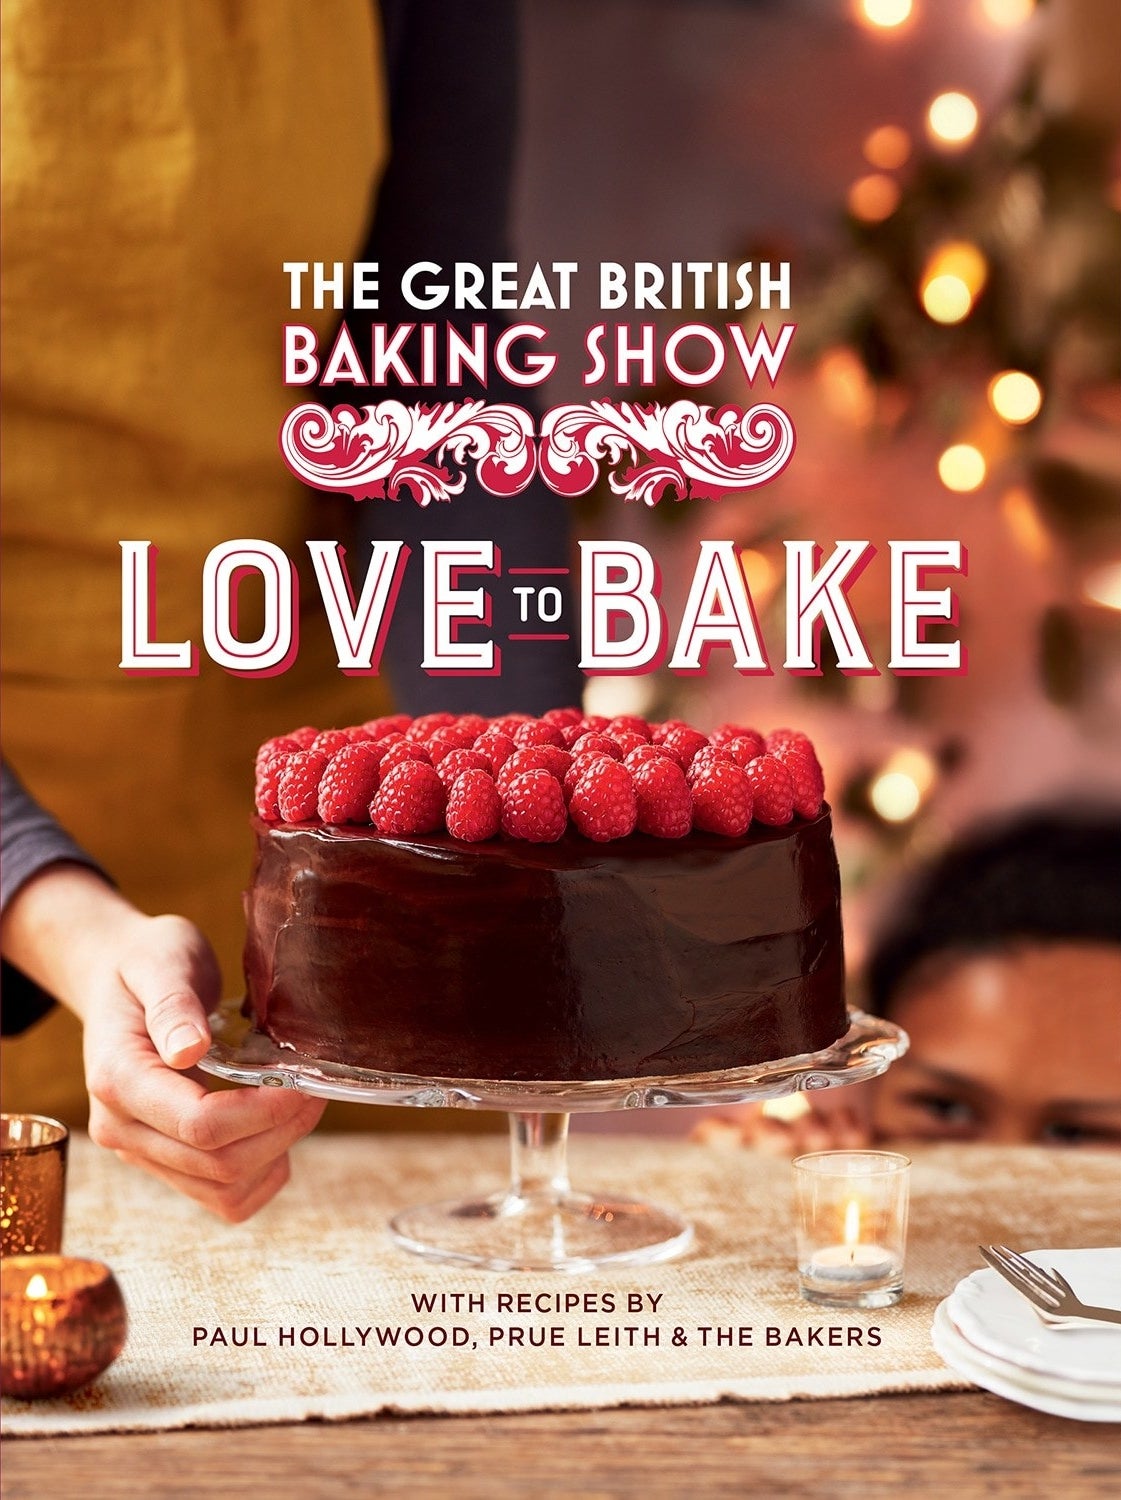 the cover, which has a chocolate cake with raspberries on it